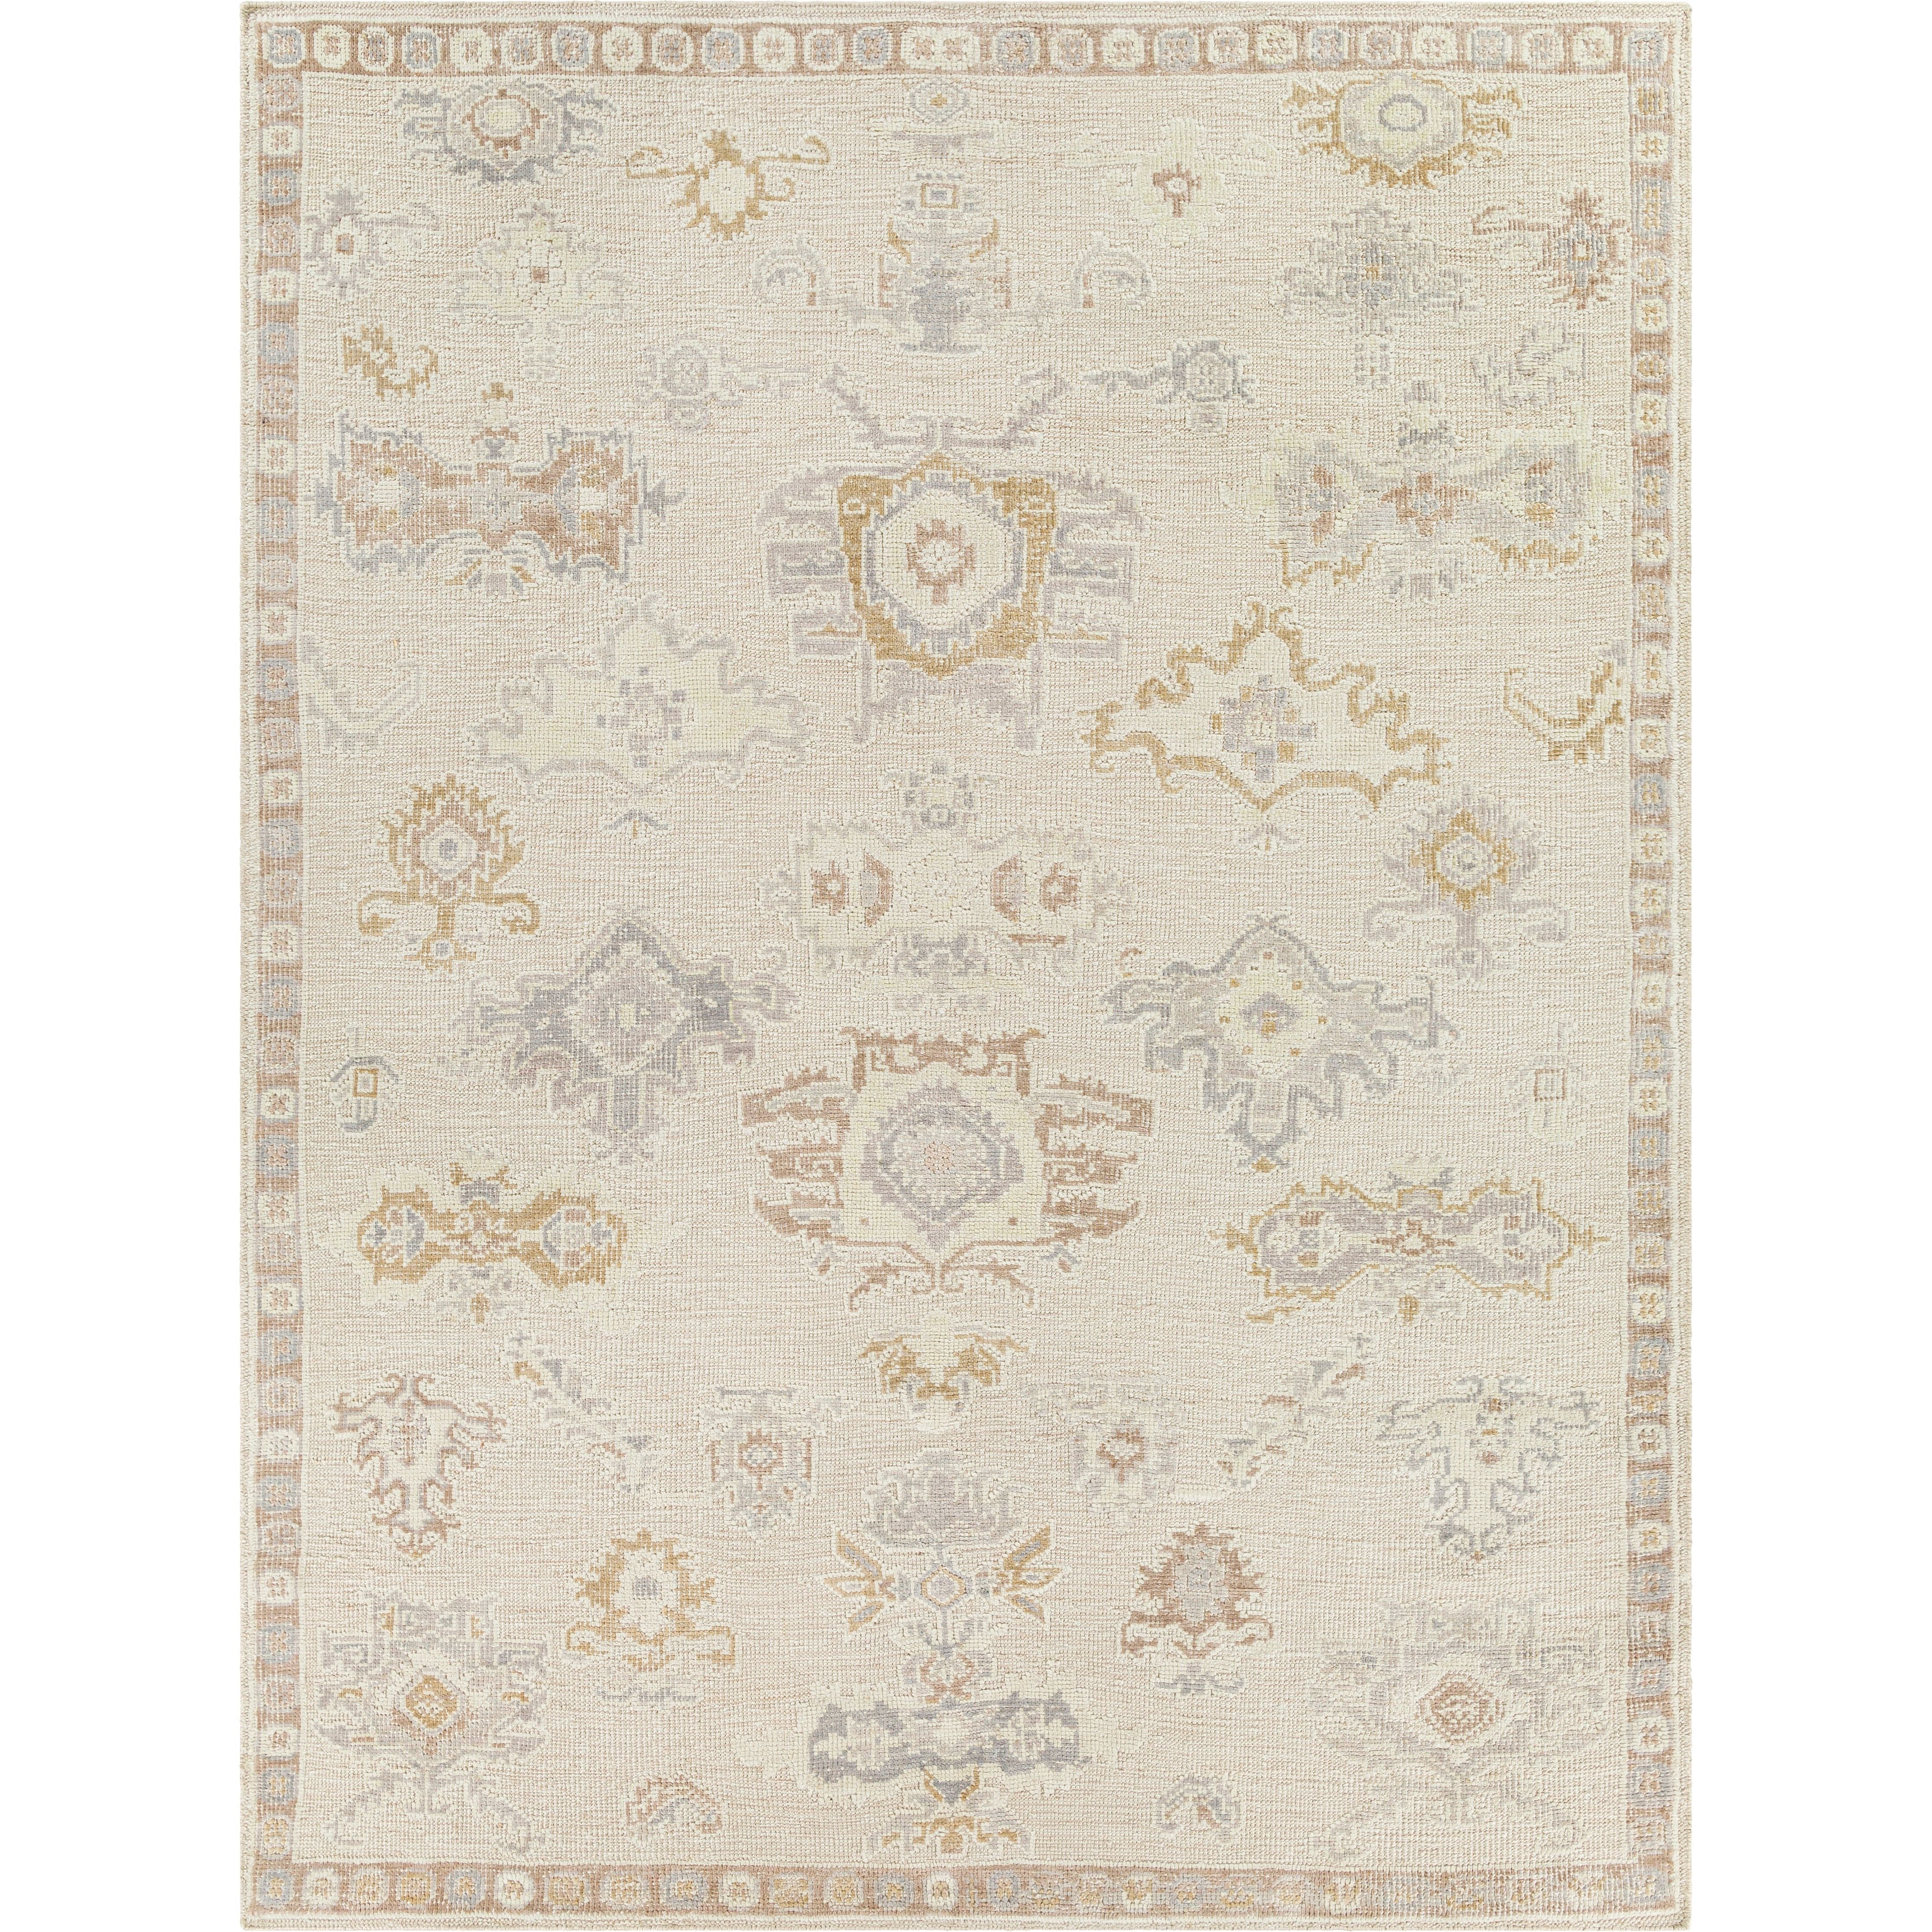 The Revere Cream rug showcases a traditional inspired design. The neutral colors and soft materials make it a cozy addition to any space, especially living rooms and dens. Amethyst Home provides interior design, new home construction design consulting, vintage area rugs, and lighting in the Omaha metro area.